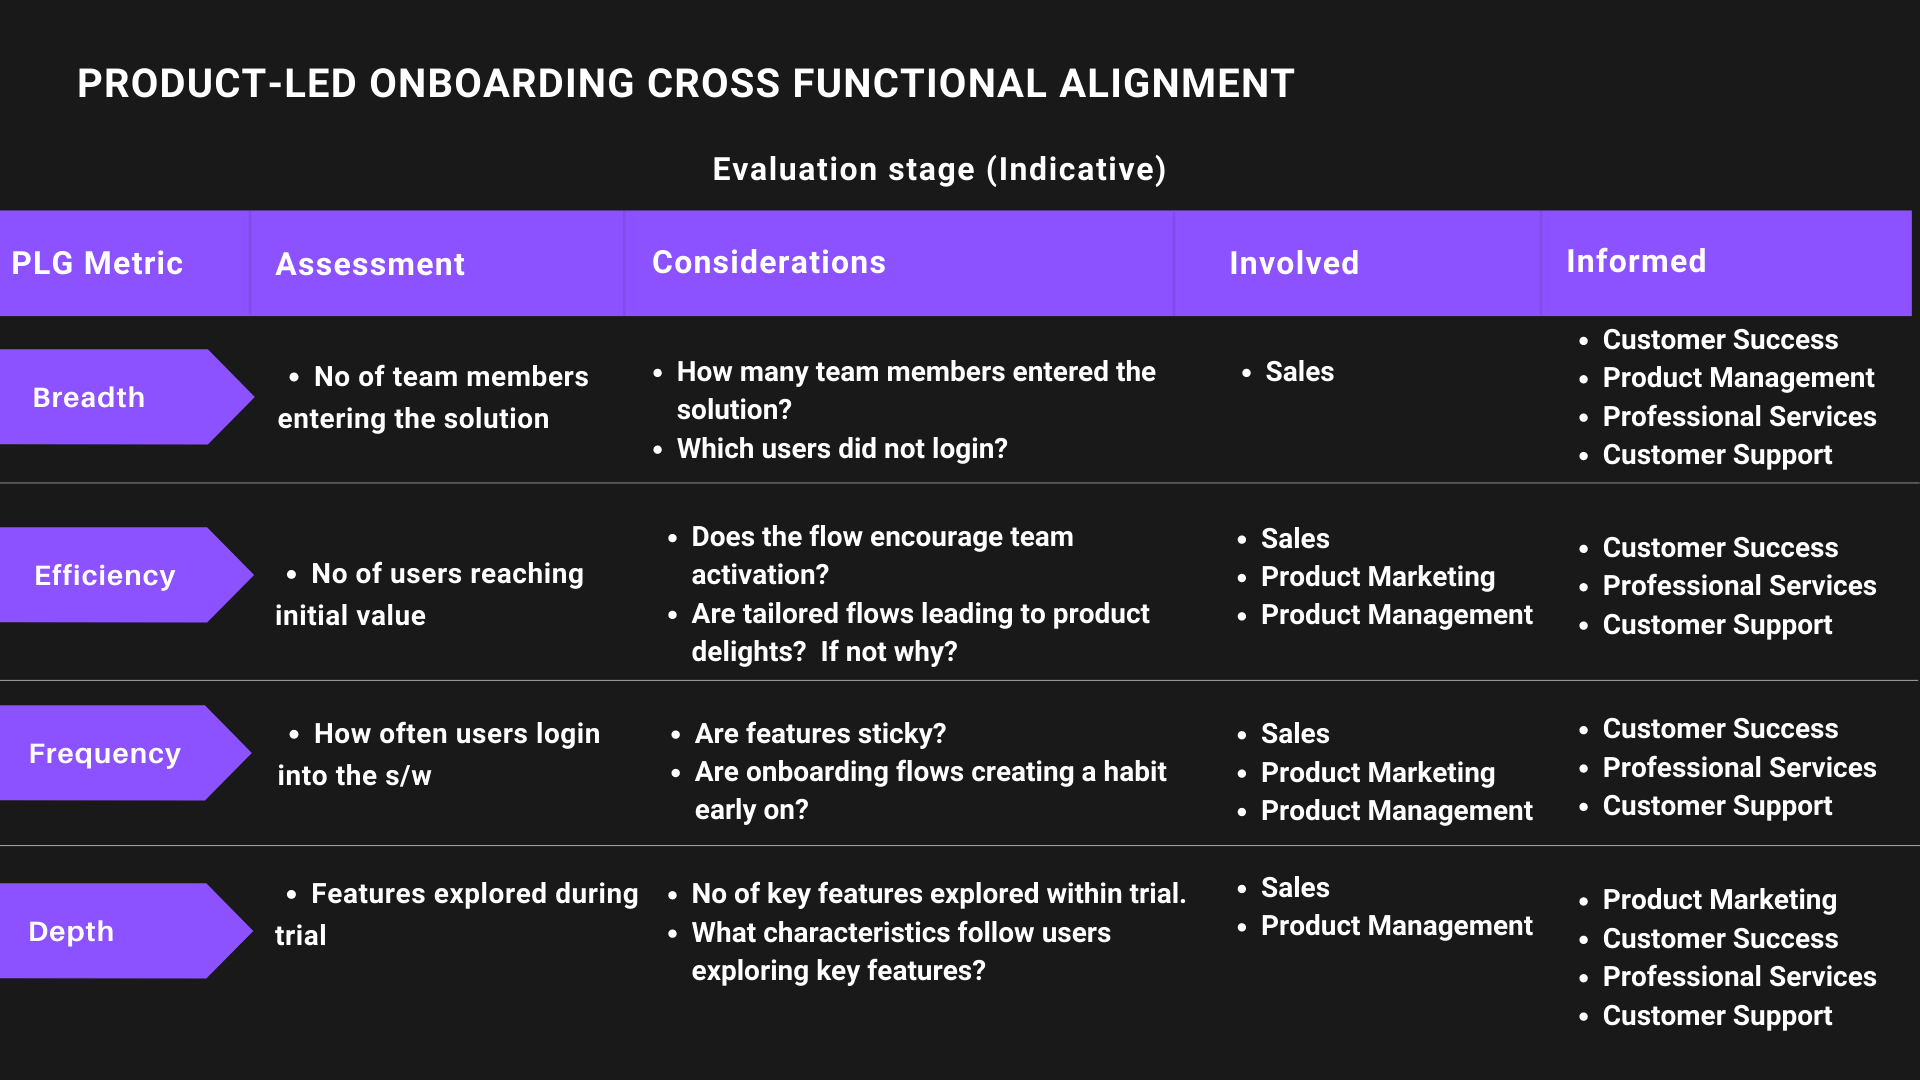 Product-led onboarding and cross-functional alignment chart